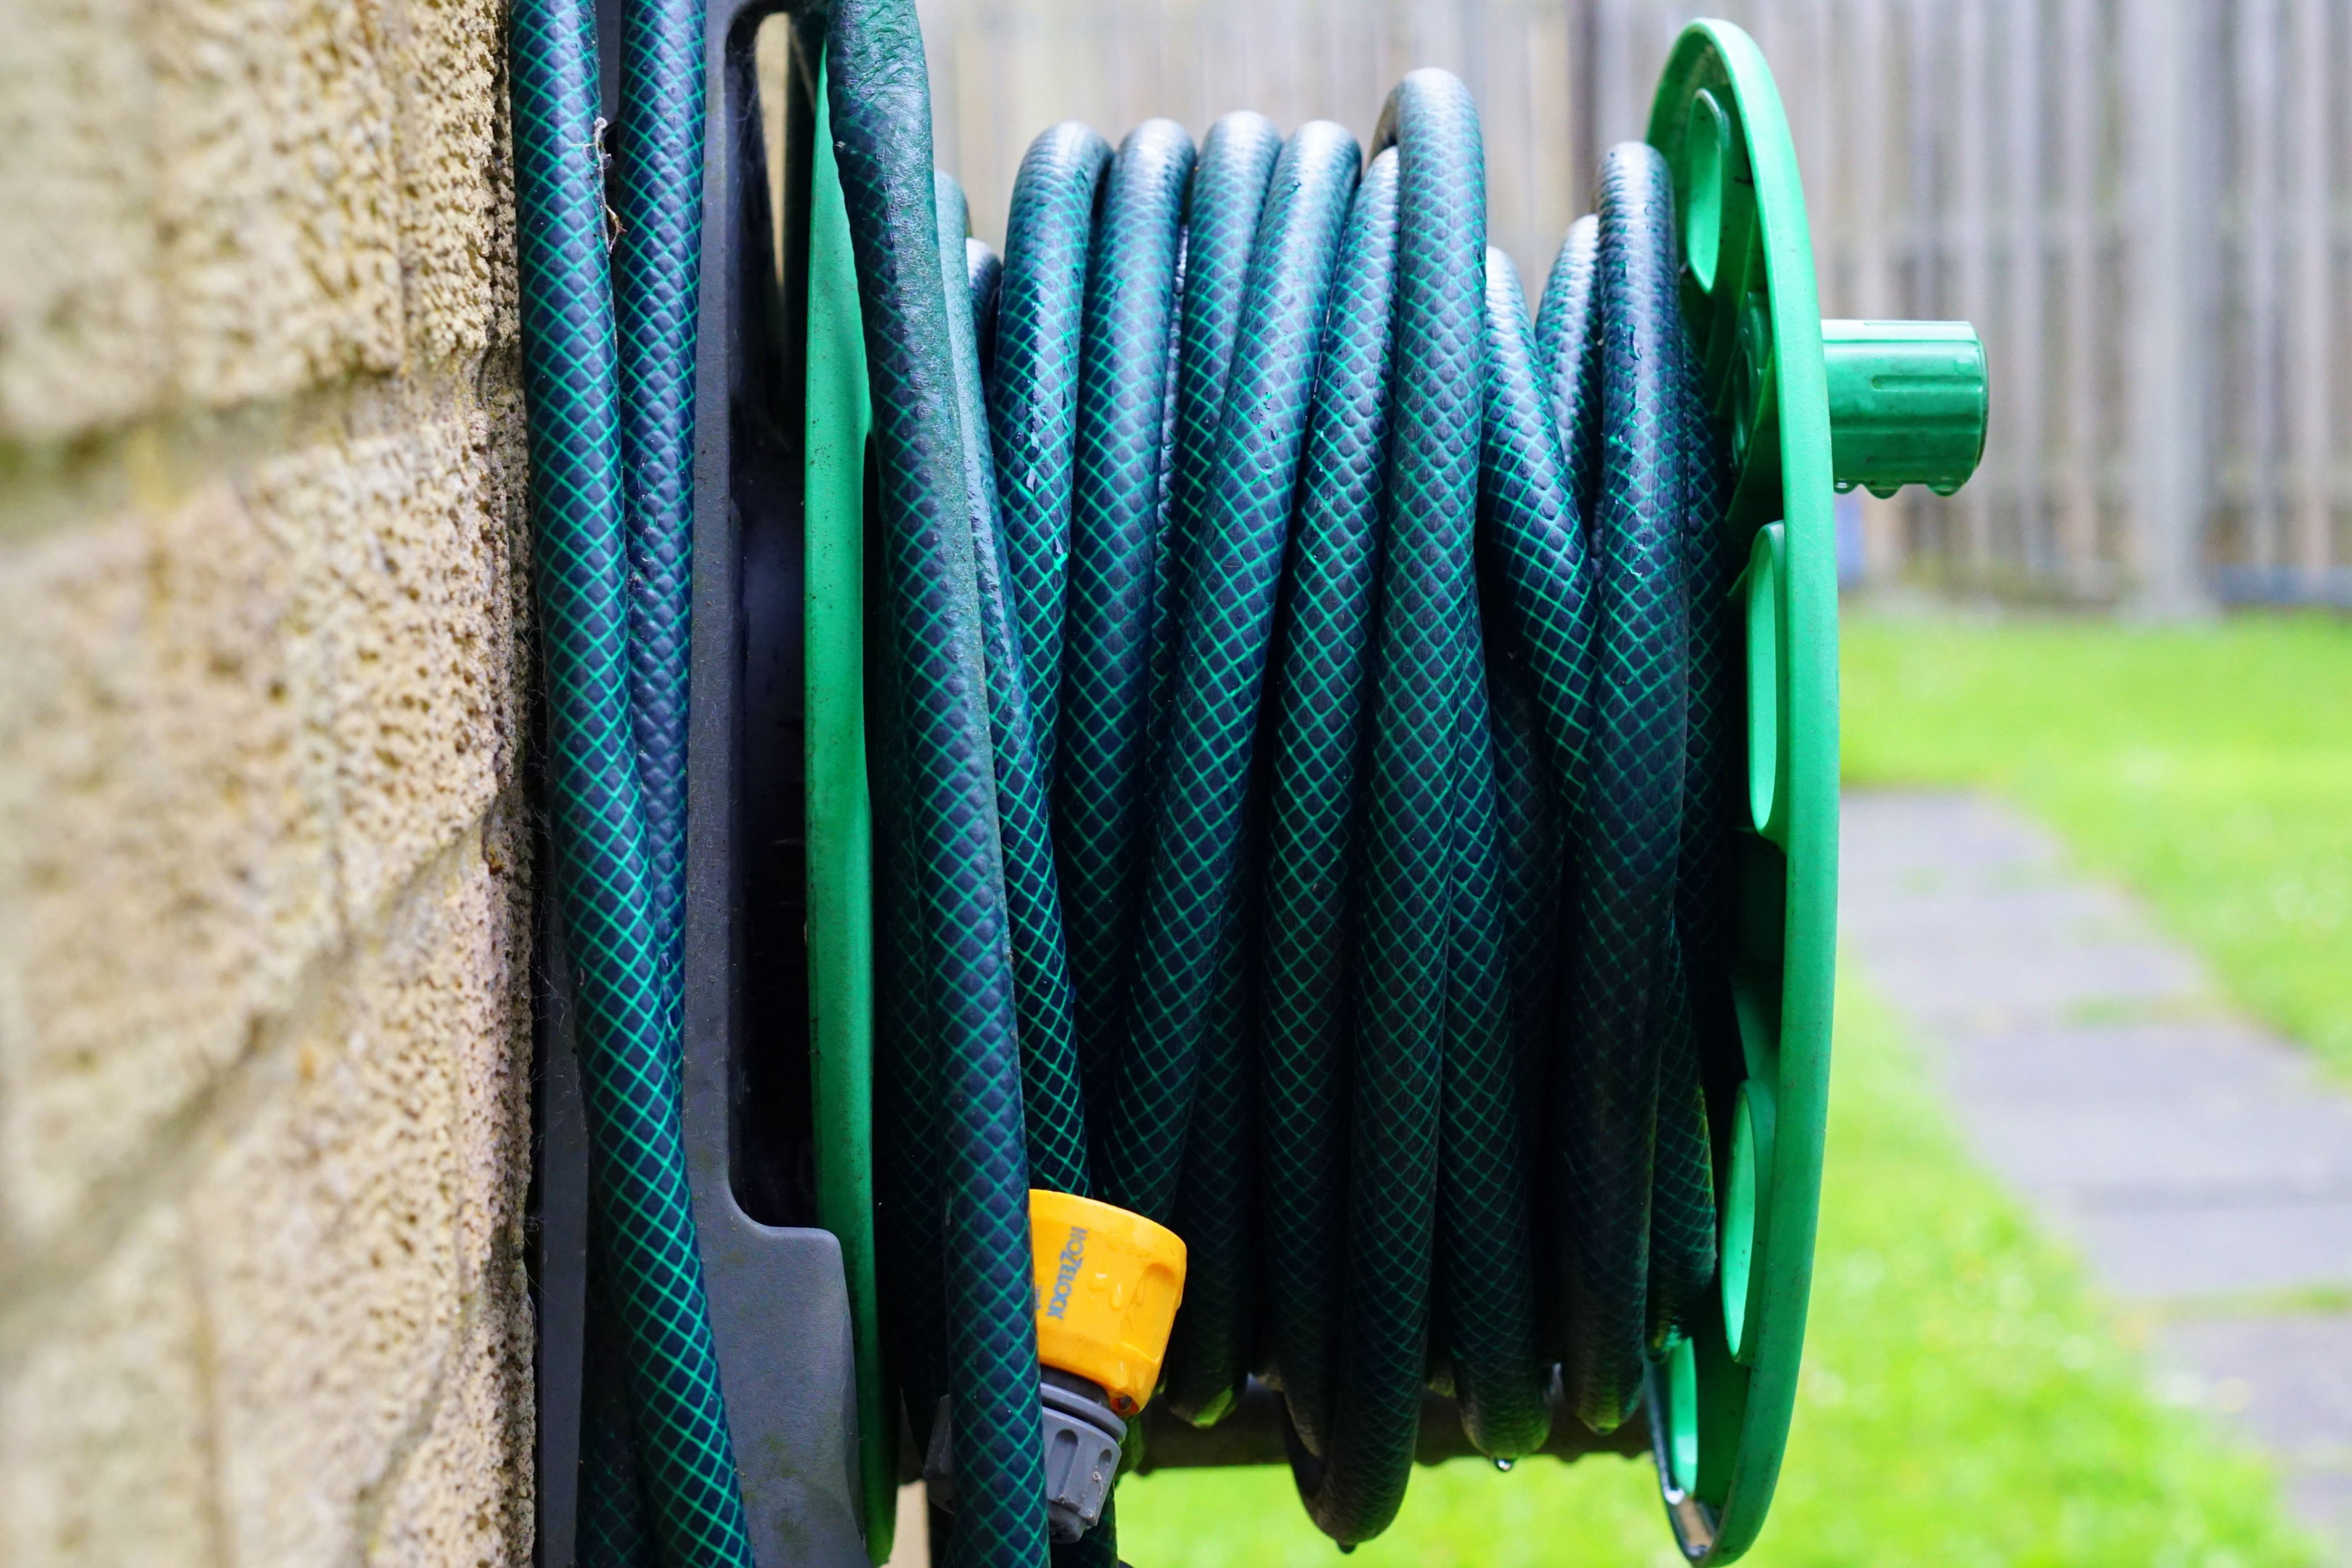 Hose used for cleaning your concrete patio.